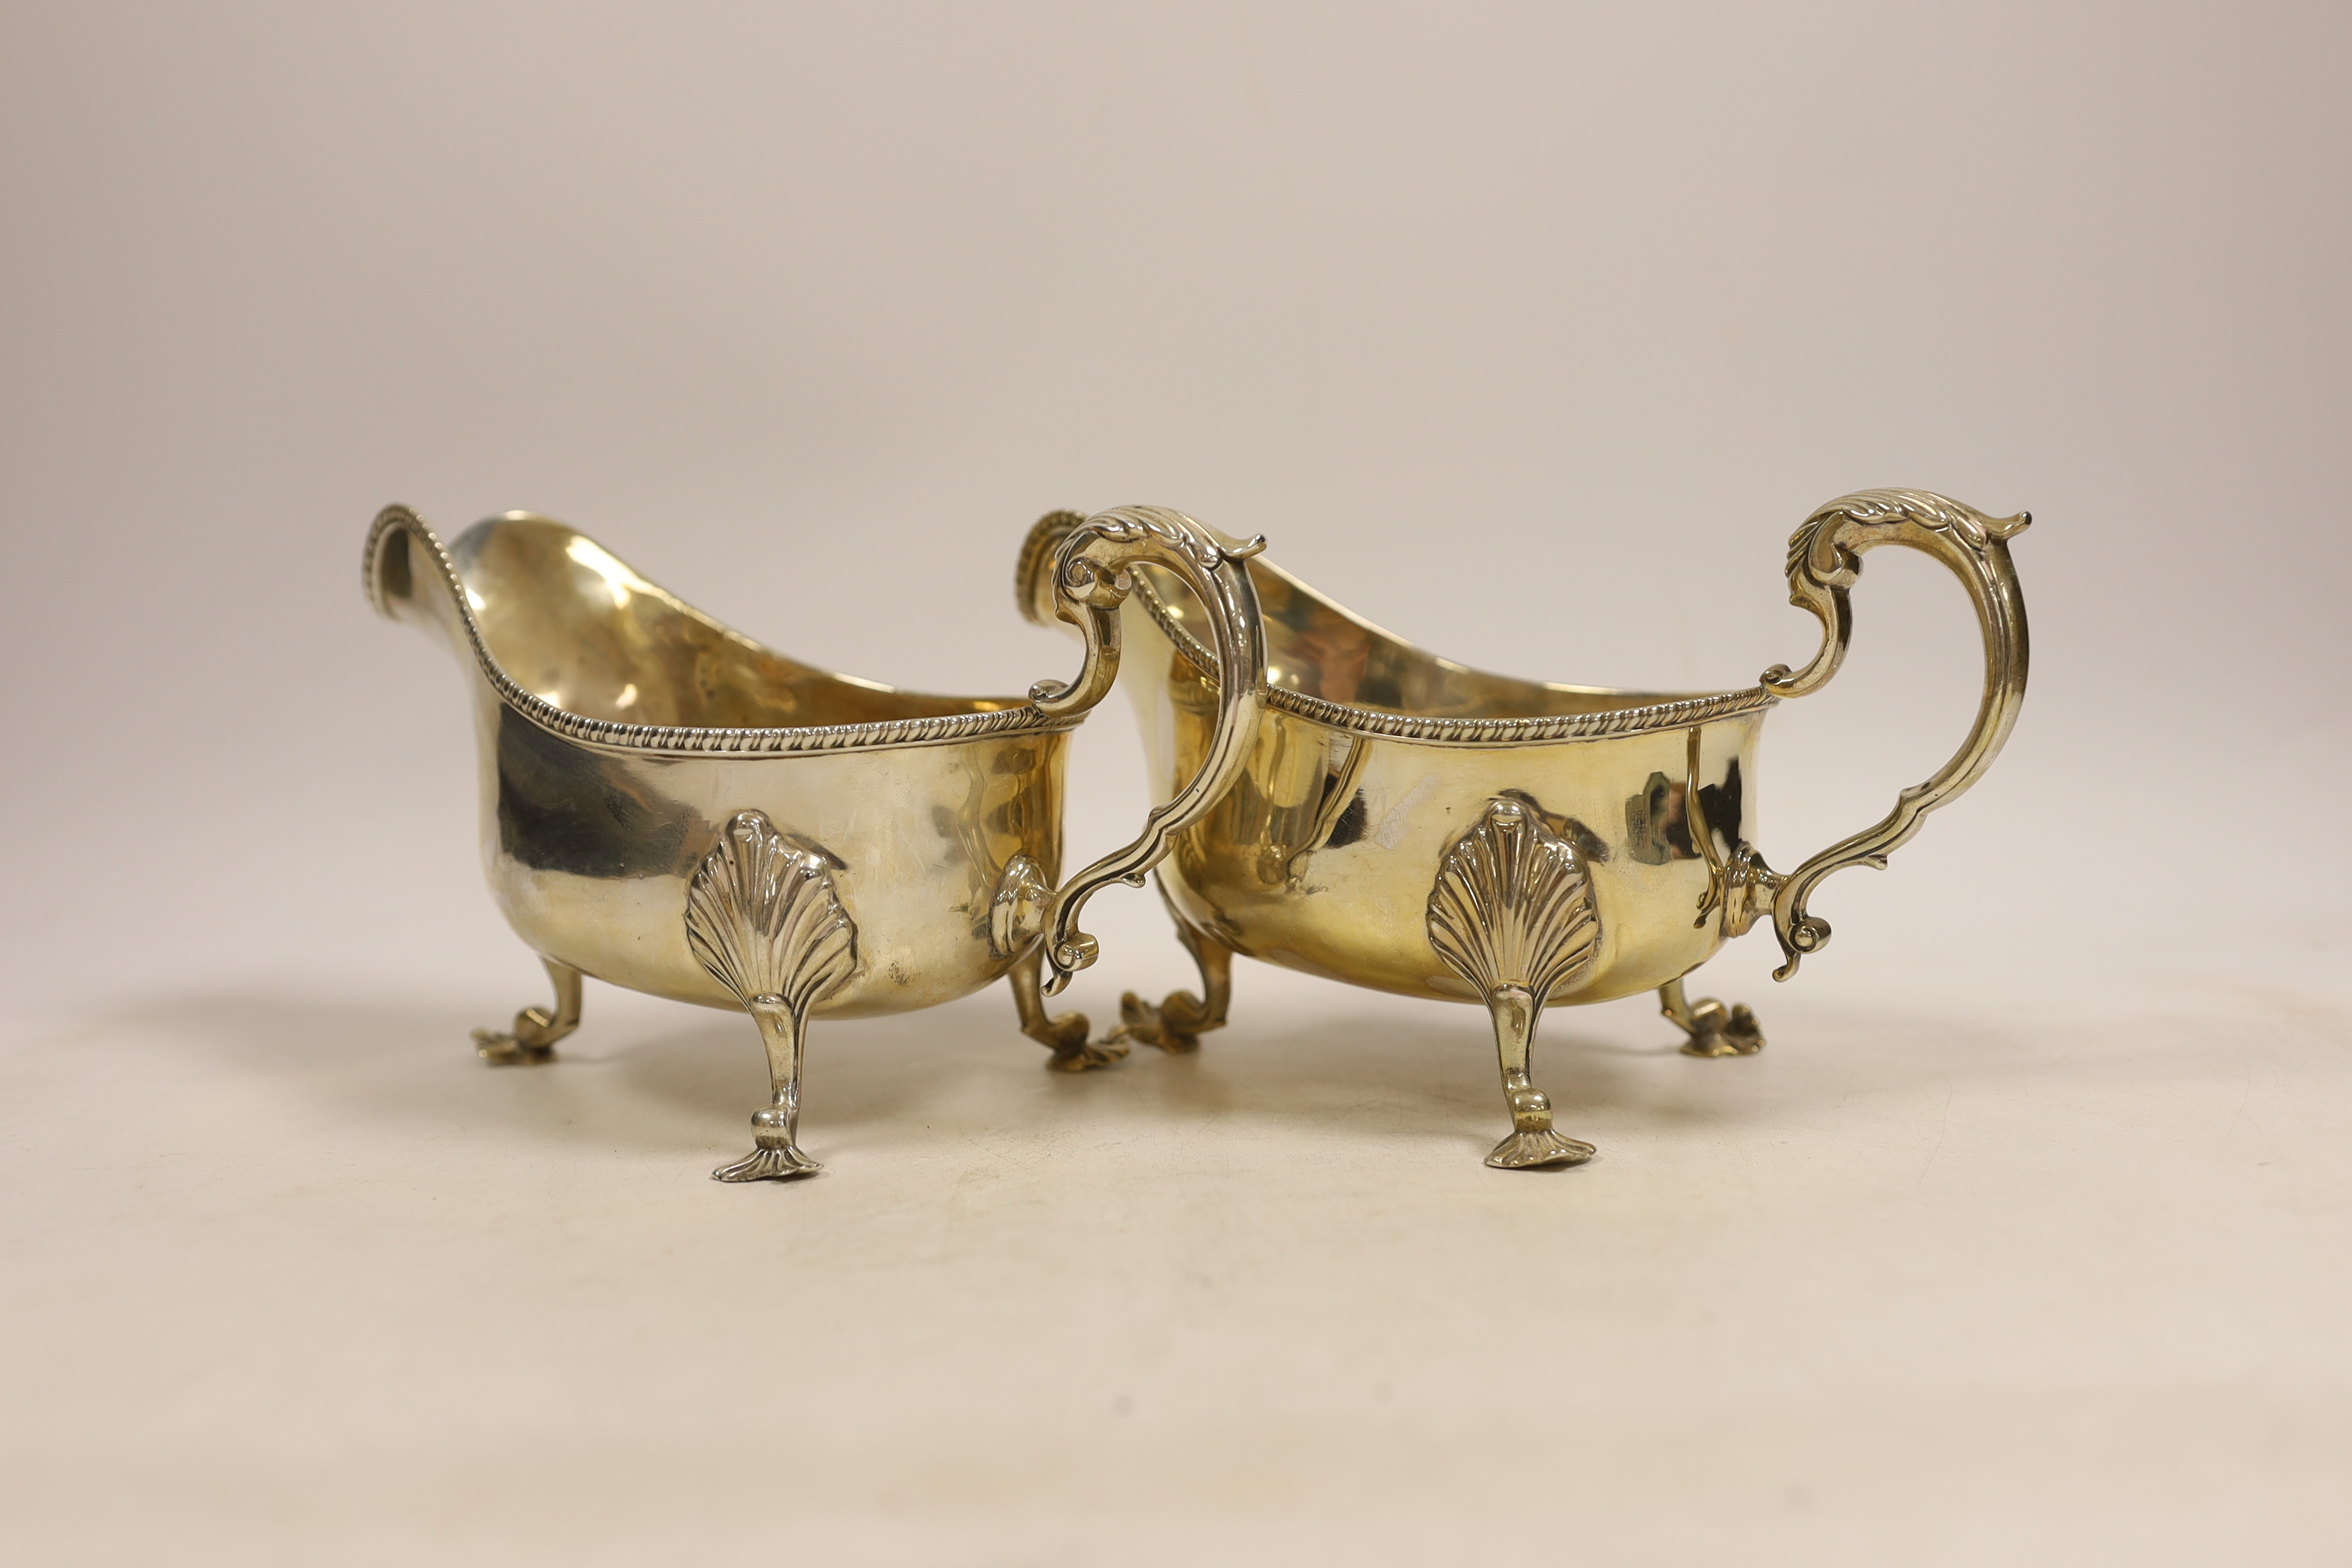 A pair of late Victorian silver sauceboats with gadrooned edge, double scroll handles on three shell and scroll feet, Wakely & Wheeler, London 1895, 21.3oz.